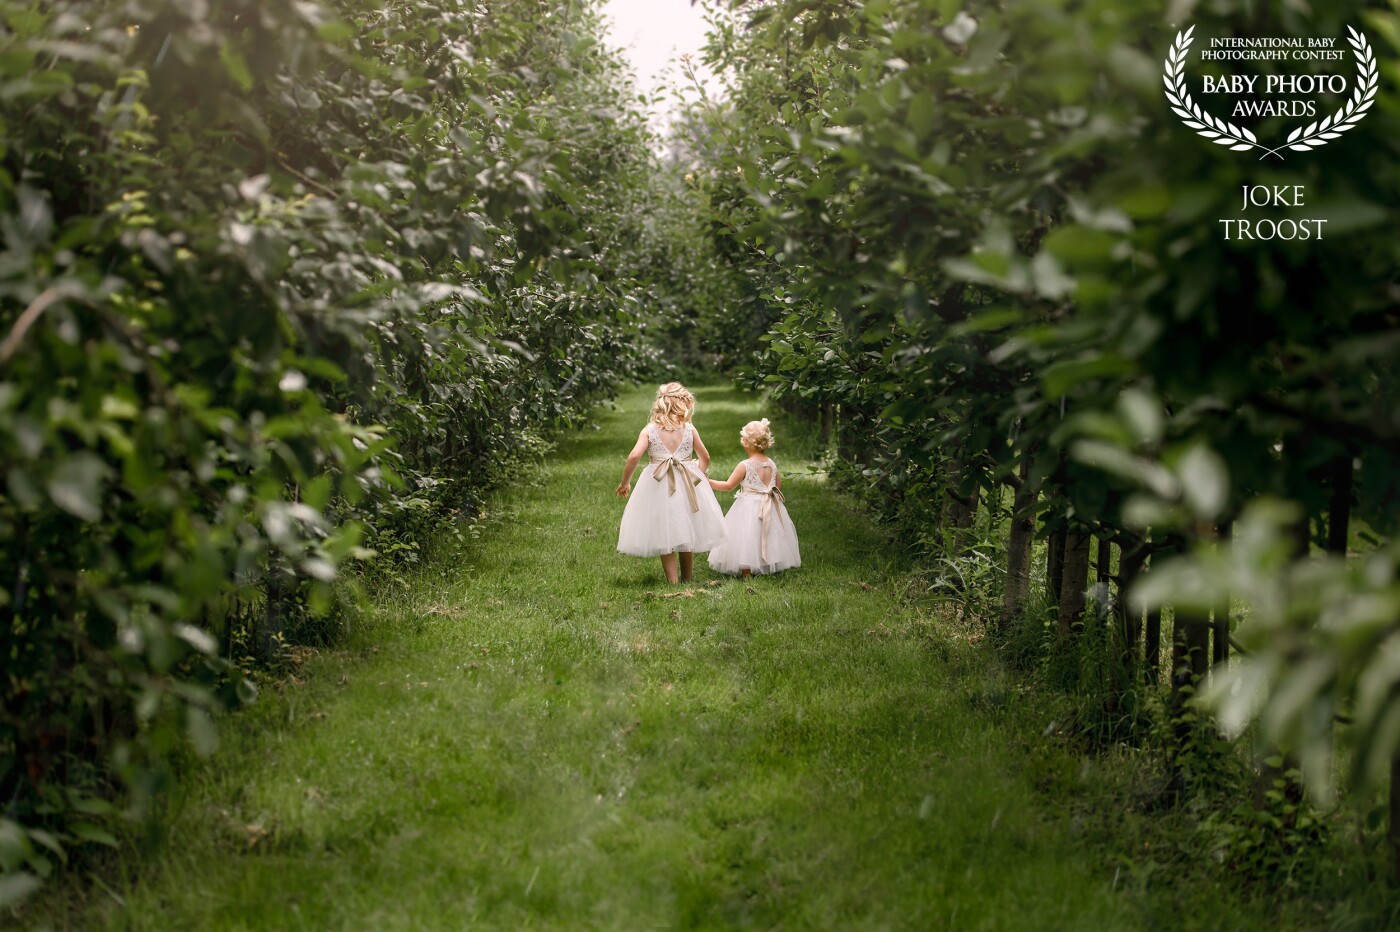 A wedding in an orchard is always high on my happy-list. This couple also had to gorgeous girls who were playing and dancing around in the orchard. This is just a tiny moment of connection between them that I managed to capture. <3